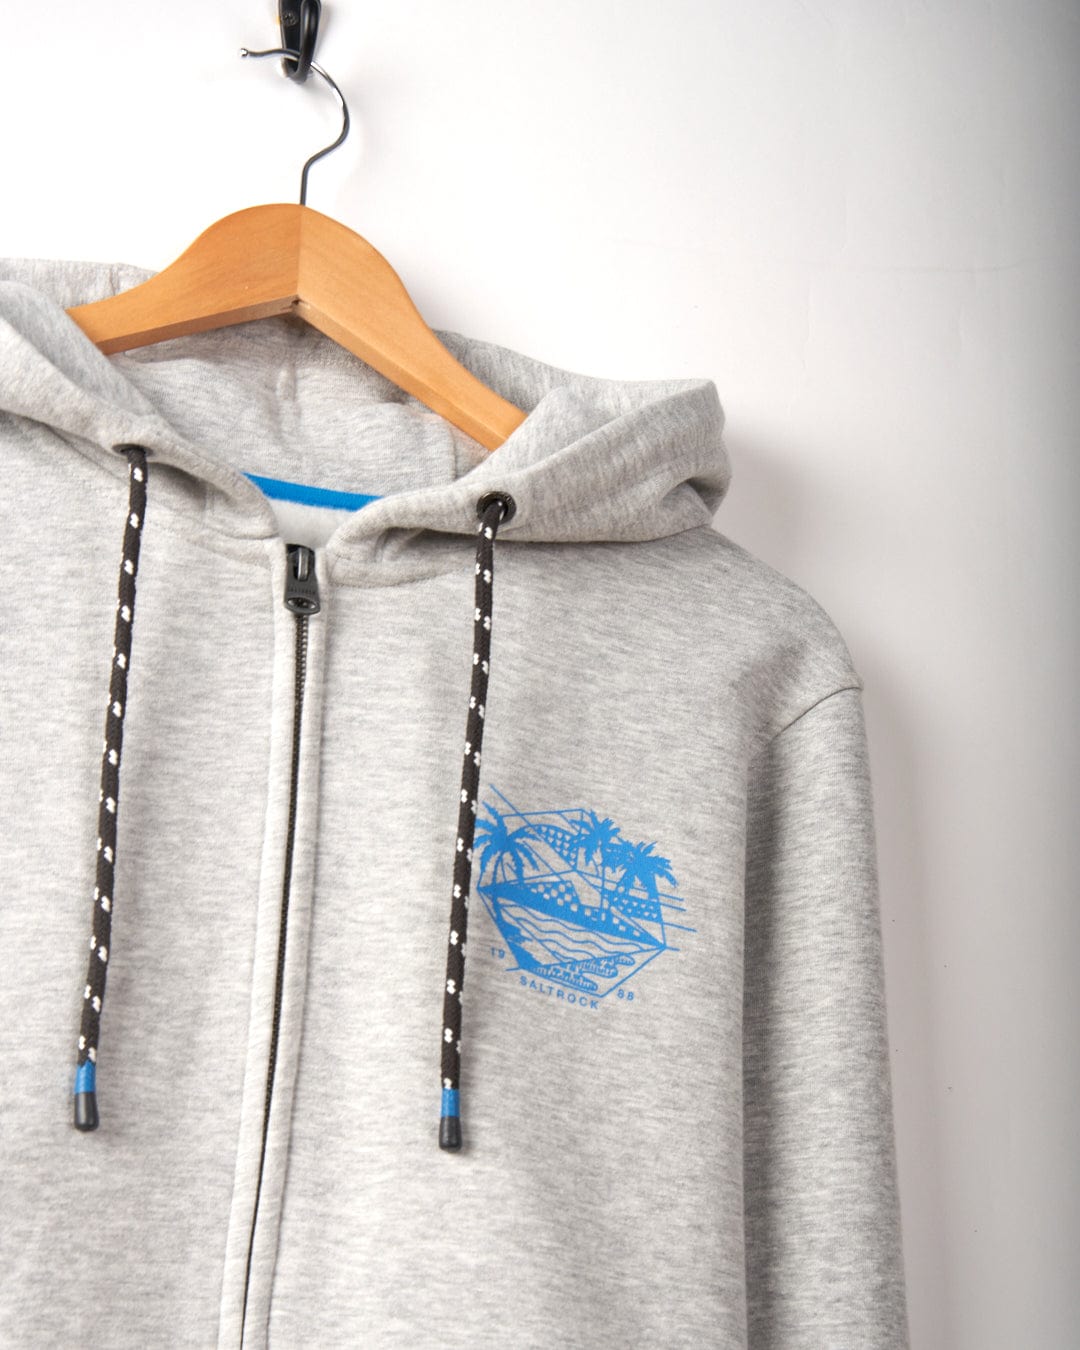 Gray hoodie with black and white drawstrings hanging on a wooden hanger. Blue graphic with palm trees and text on the left chest area features subtle Saltrock branding. Geo Palms - Mens Recycled Zip Hoodie - Grey on a white background.